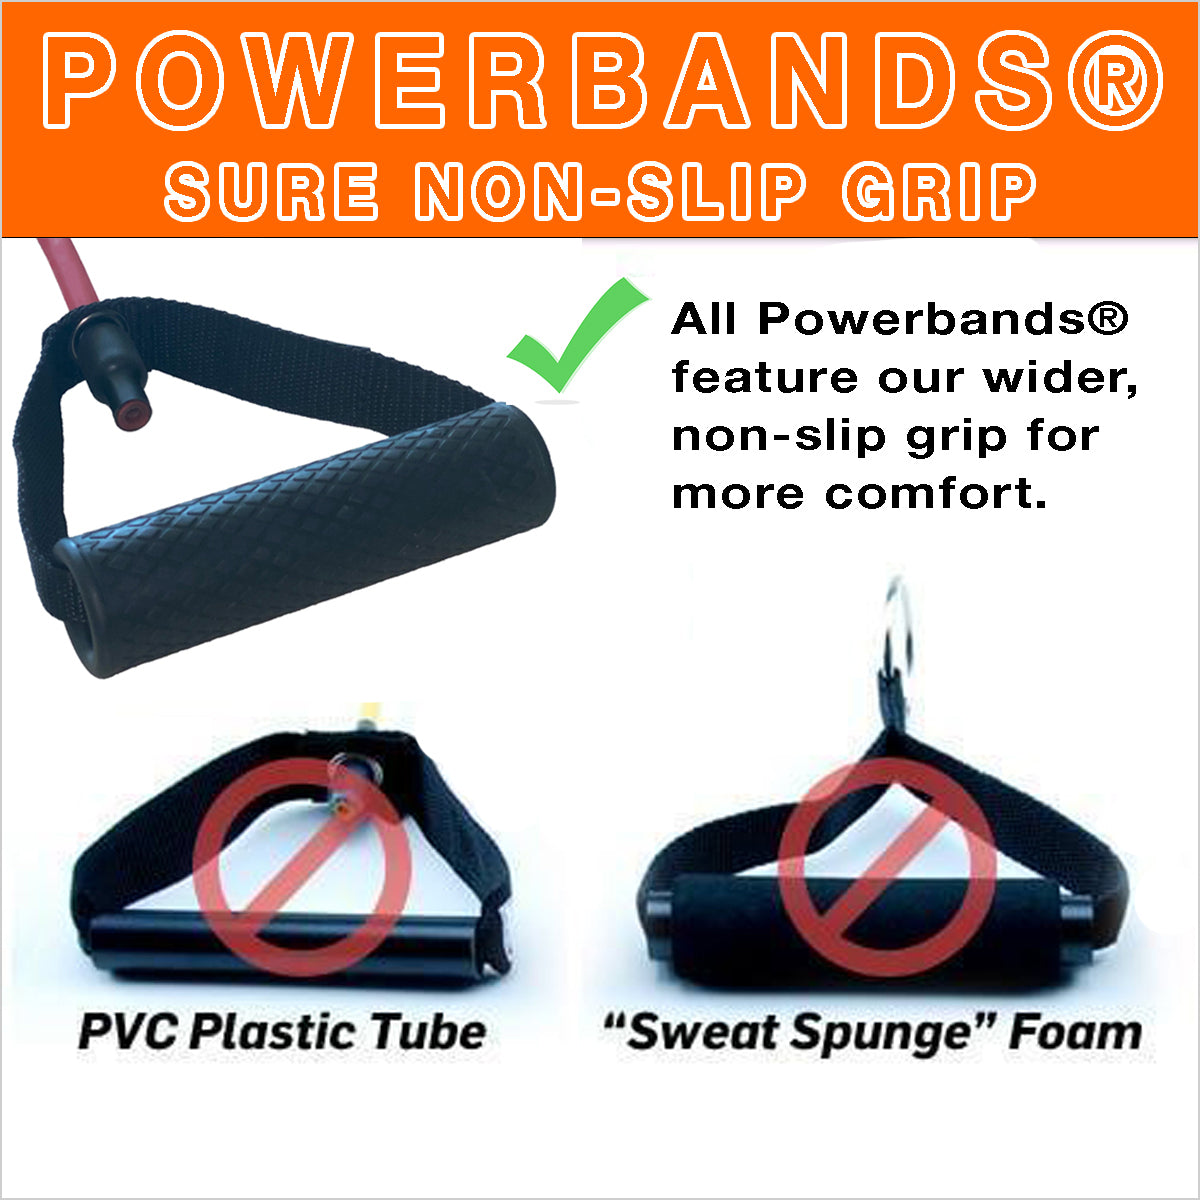 Gray Band Powerbands comfort wide handle non slip grip for SoloStrength resistance bands - 6 tension options